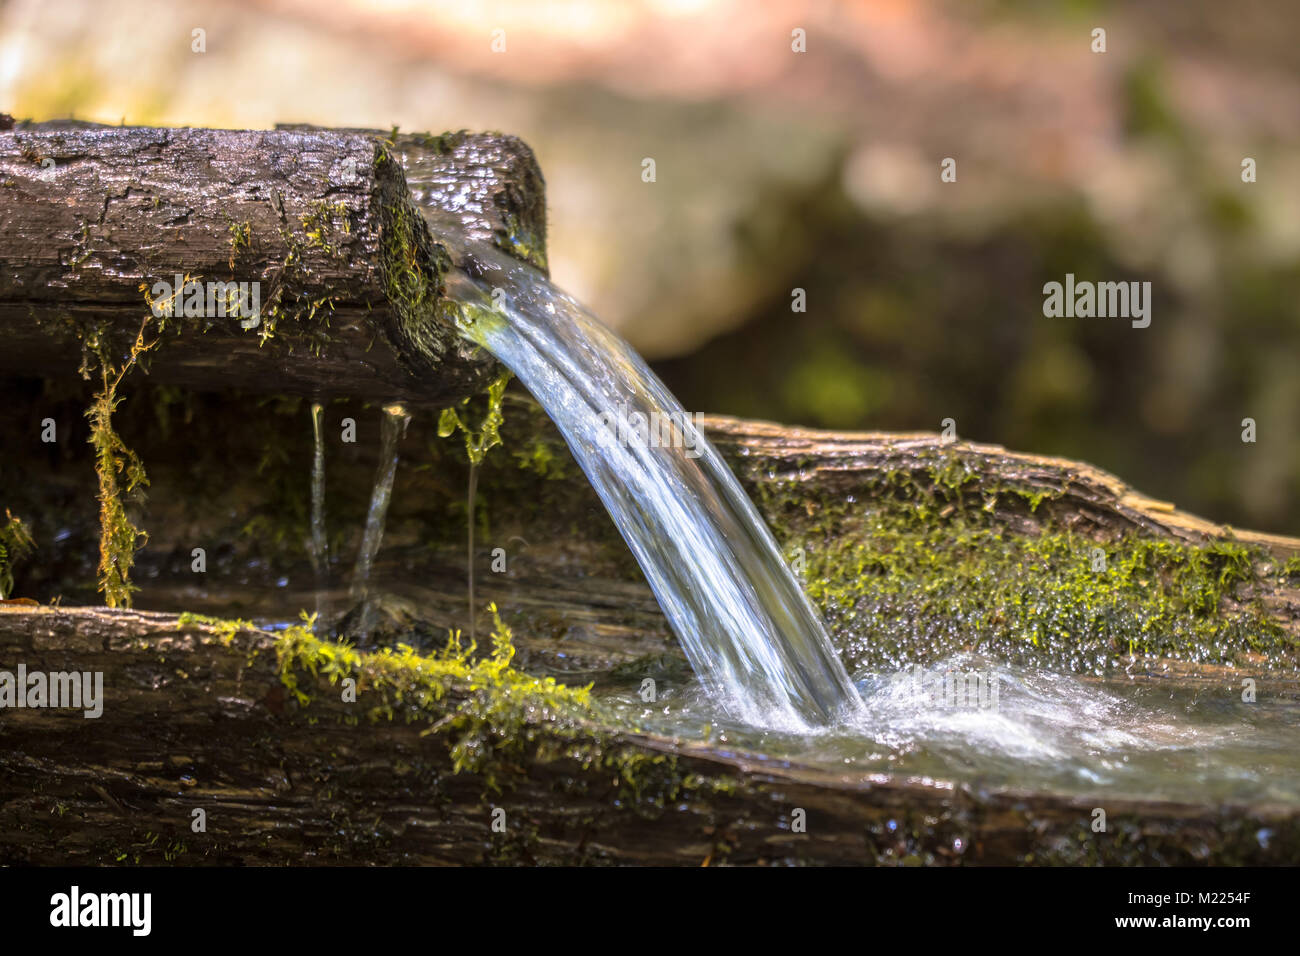 Mountain water spring out of wooden gutter from rocky creek. Blurred water by long exposure. Stock Photo